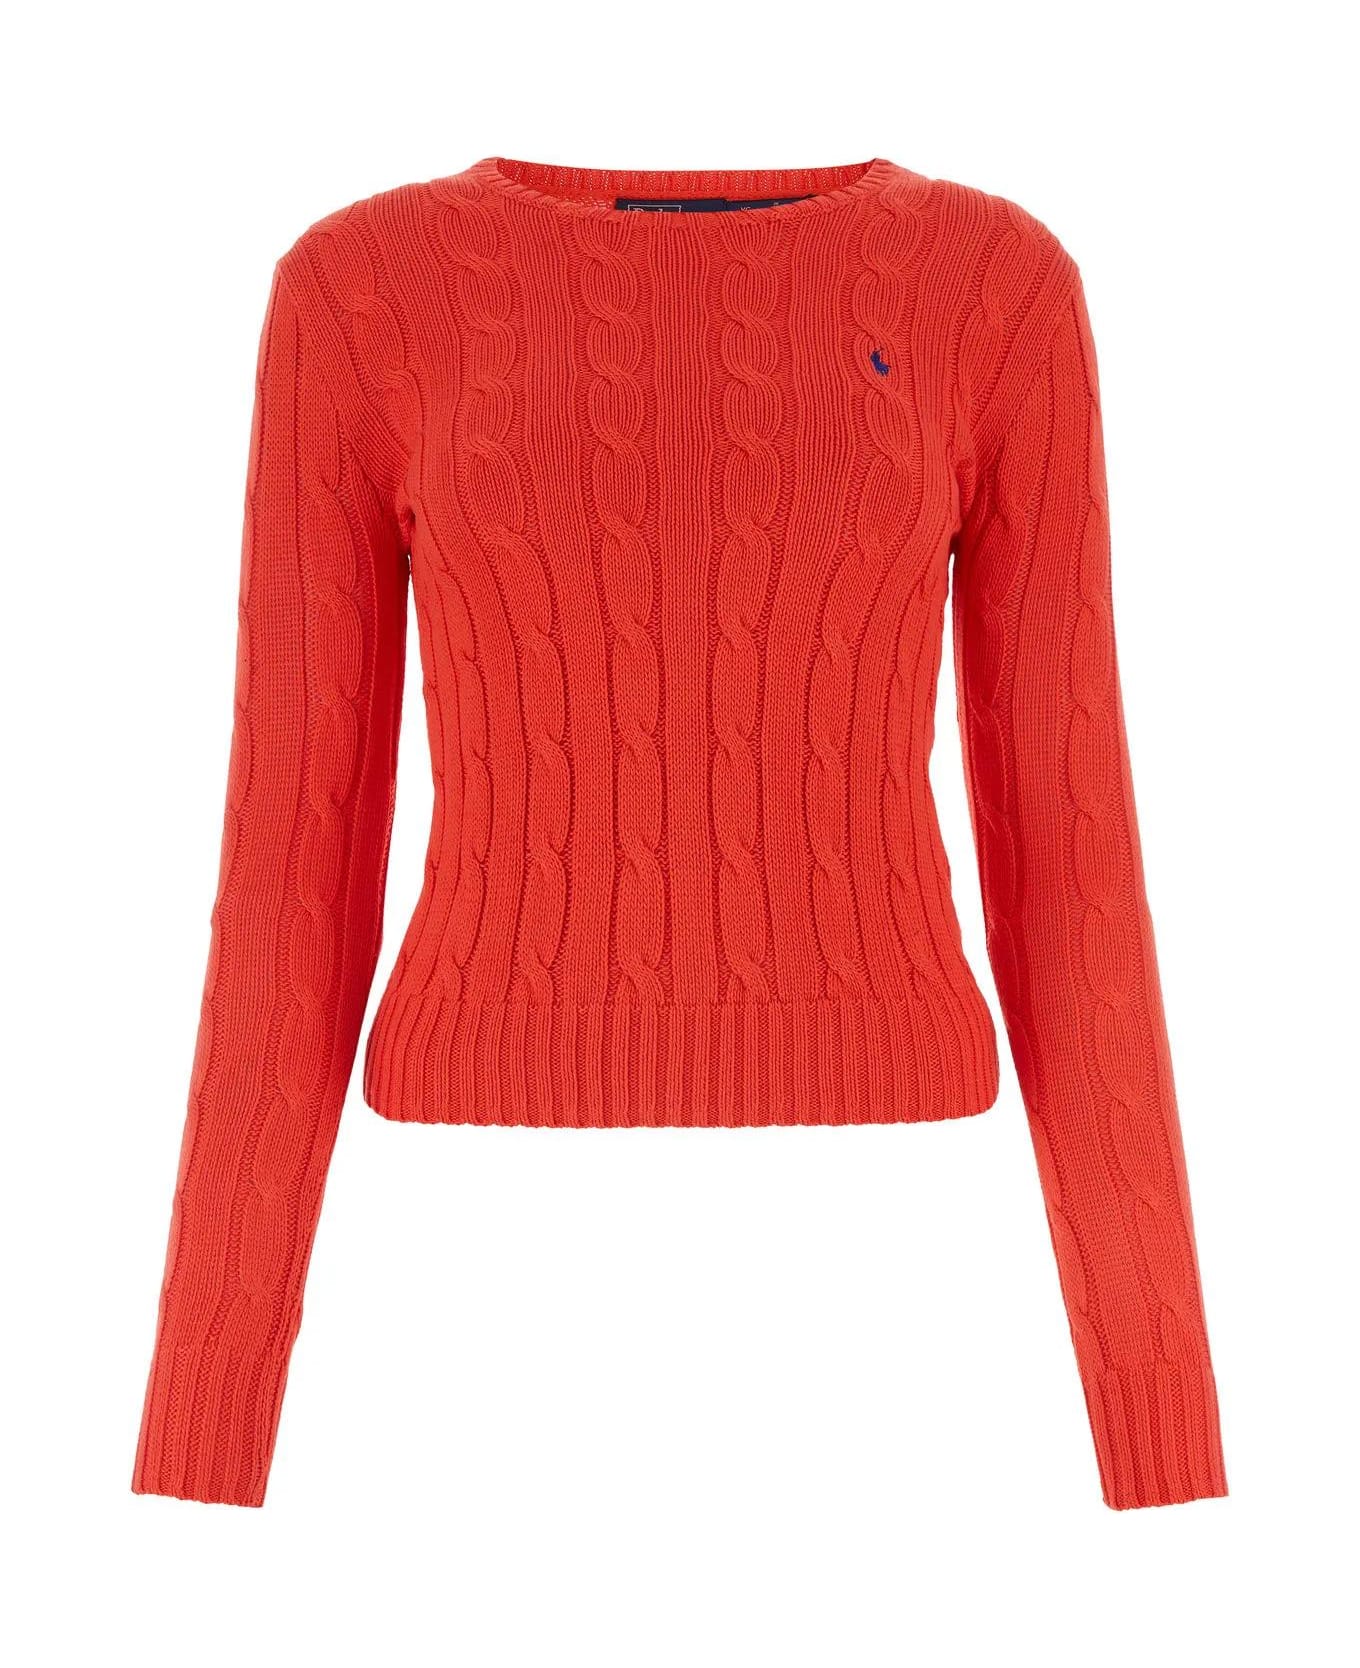 Polo Ralph Lauren Red Cotton Sweater - Red